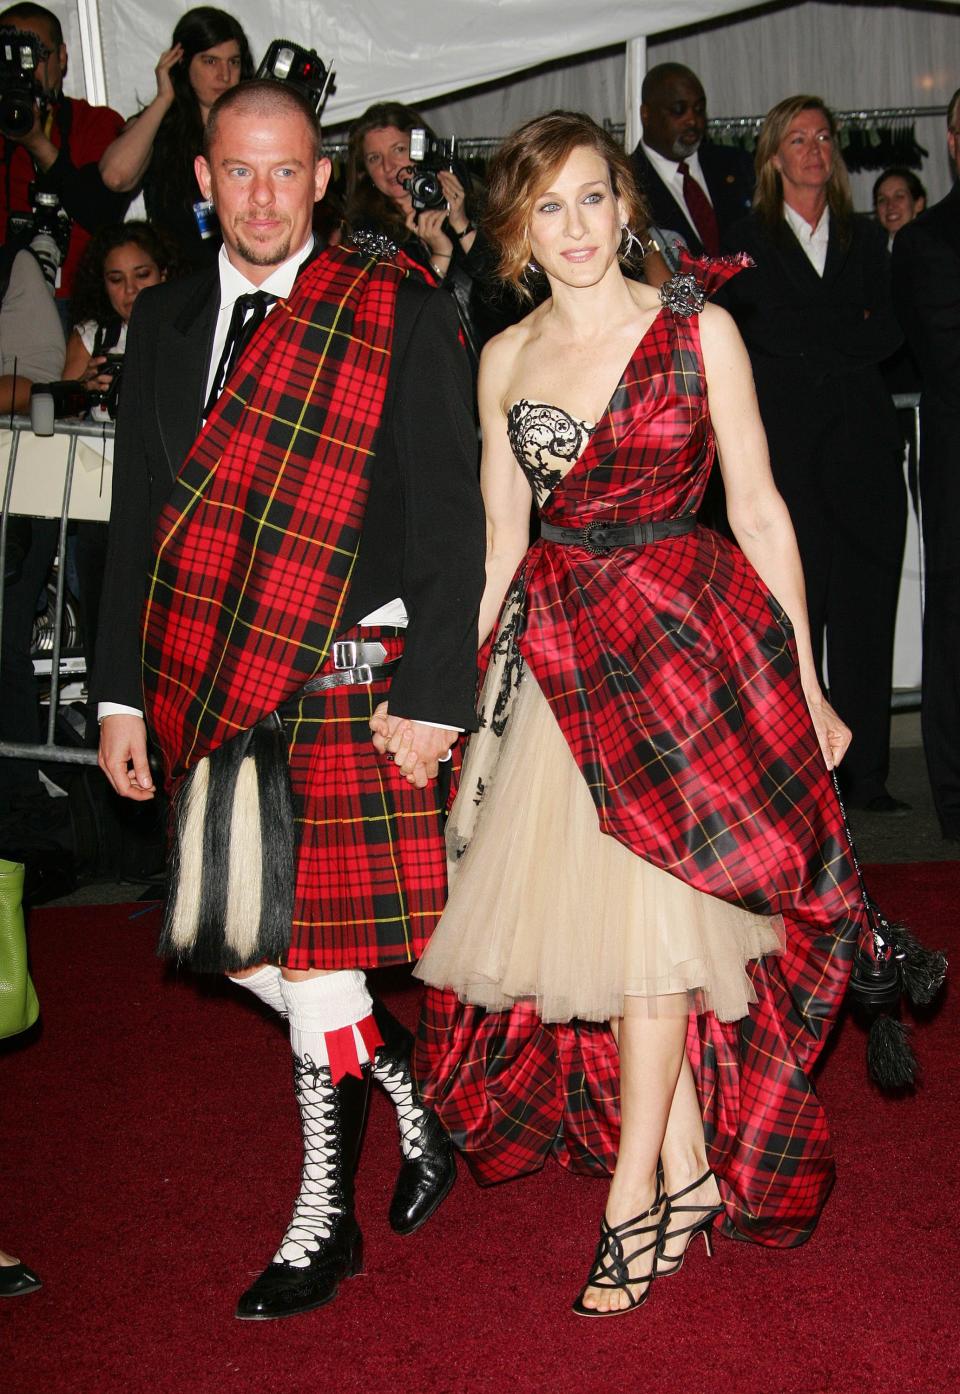 Alexander McQueen in a red plaid sash over his suit jacket and a red plaid kilt. Sarah Jessica Parker in a nude tulle strapless dress with a lace bustier and red plaid sash forming one arm strap and being belted before flowing over the dress to the ground.